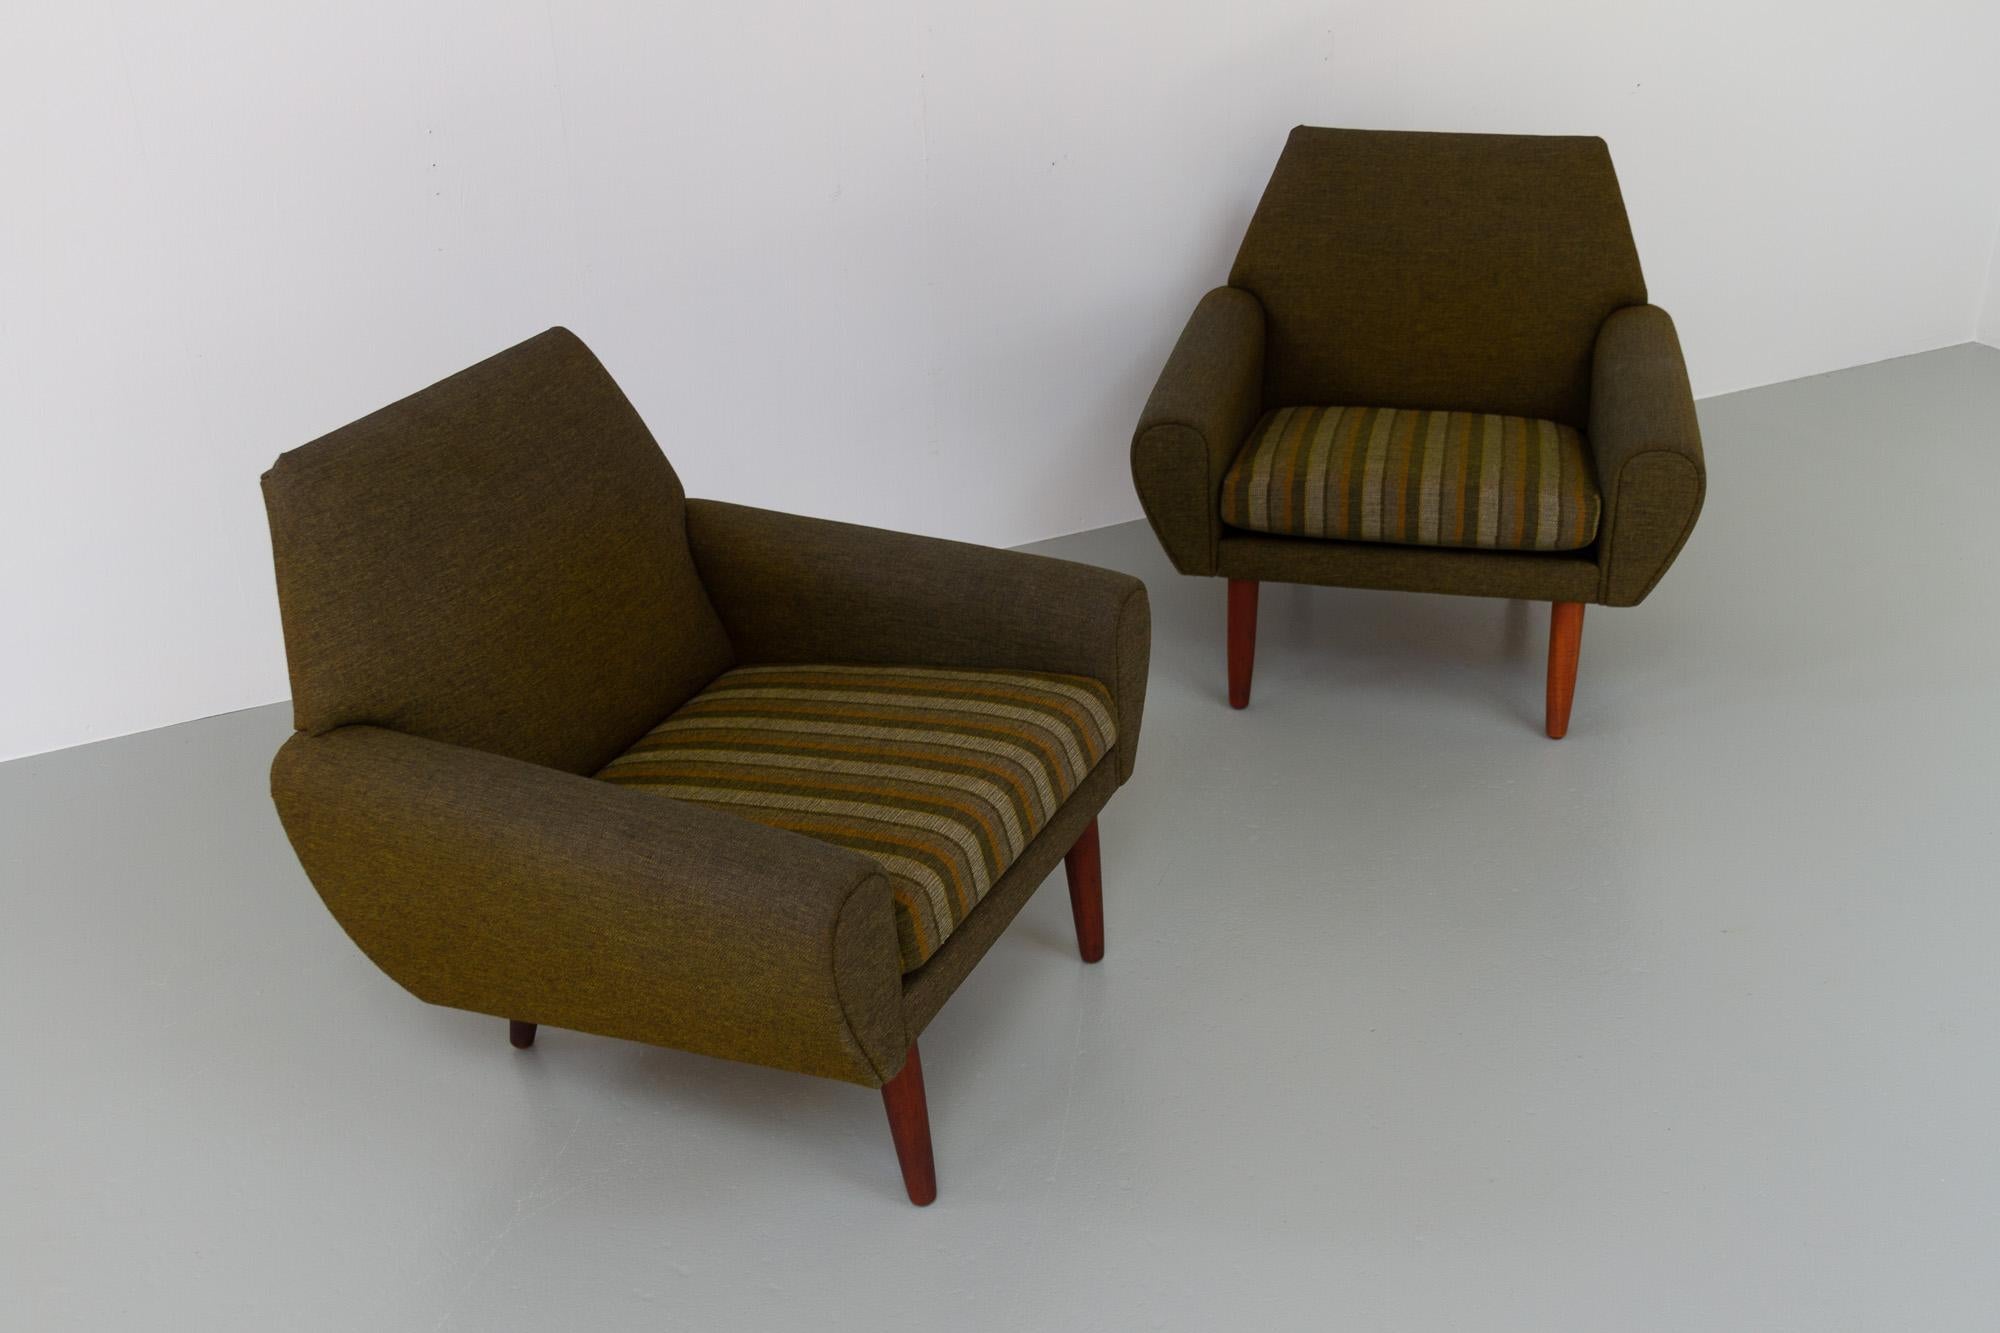 Vintage Danish modern lounge chairs by Kurt Østervig for Ryesberg Møbler, 1960.
Scandinavian Mid-Century Modern pair of green upholstered easy chairs with spring cushions. Attributed to Danish designer Kurt Østervig and therefore likely